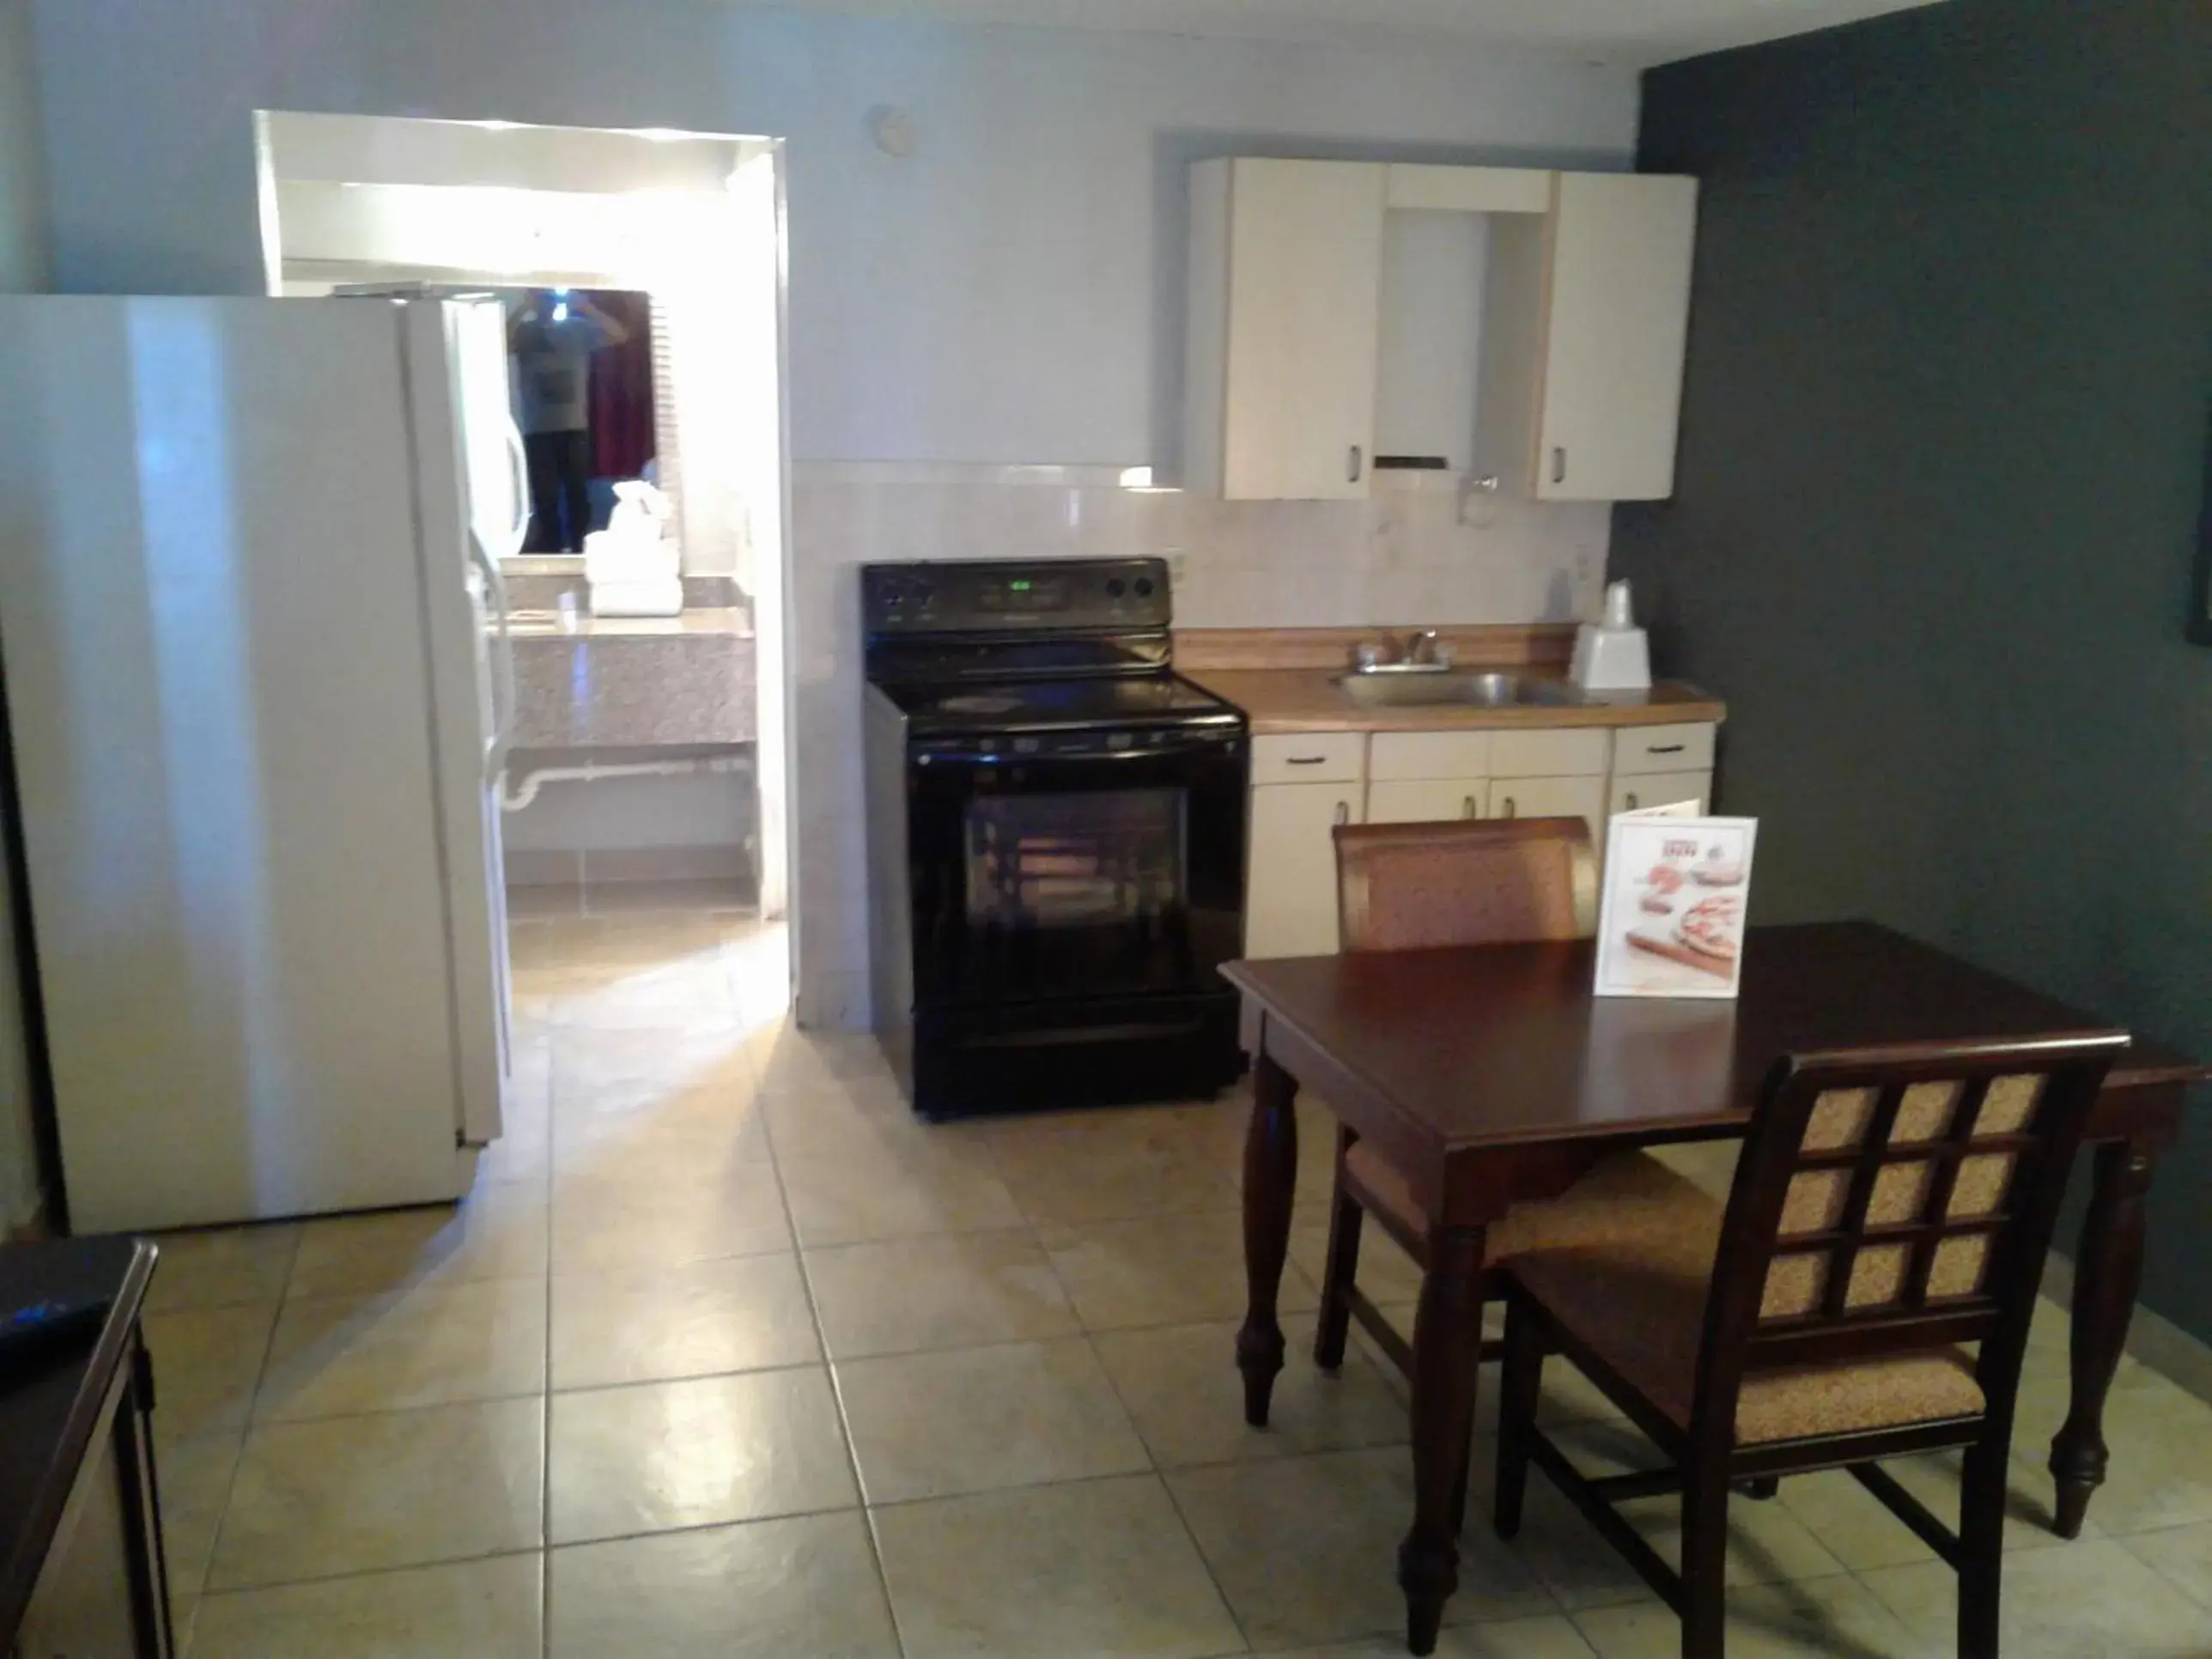 Kitchen/Kitchenette in Express Inn & Suites - 5 Miles from St Petersburg Clearwater Airport